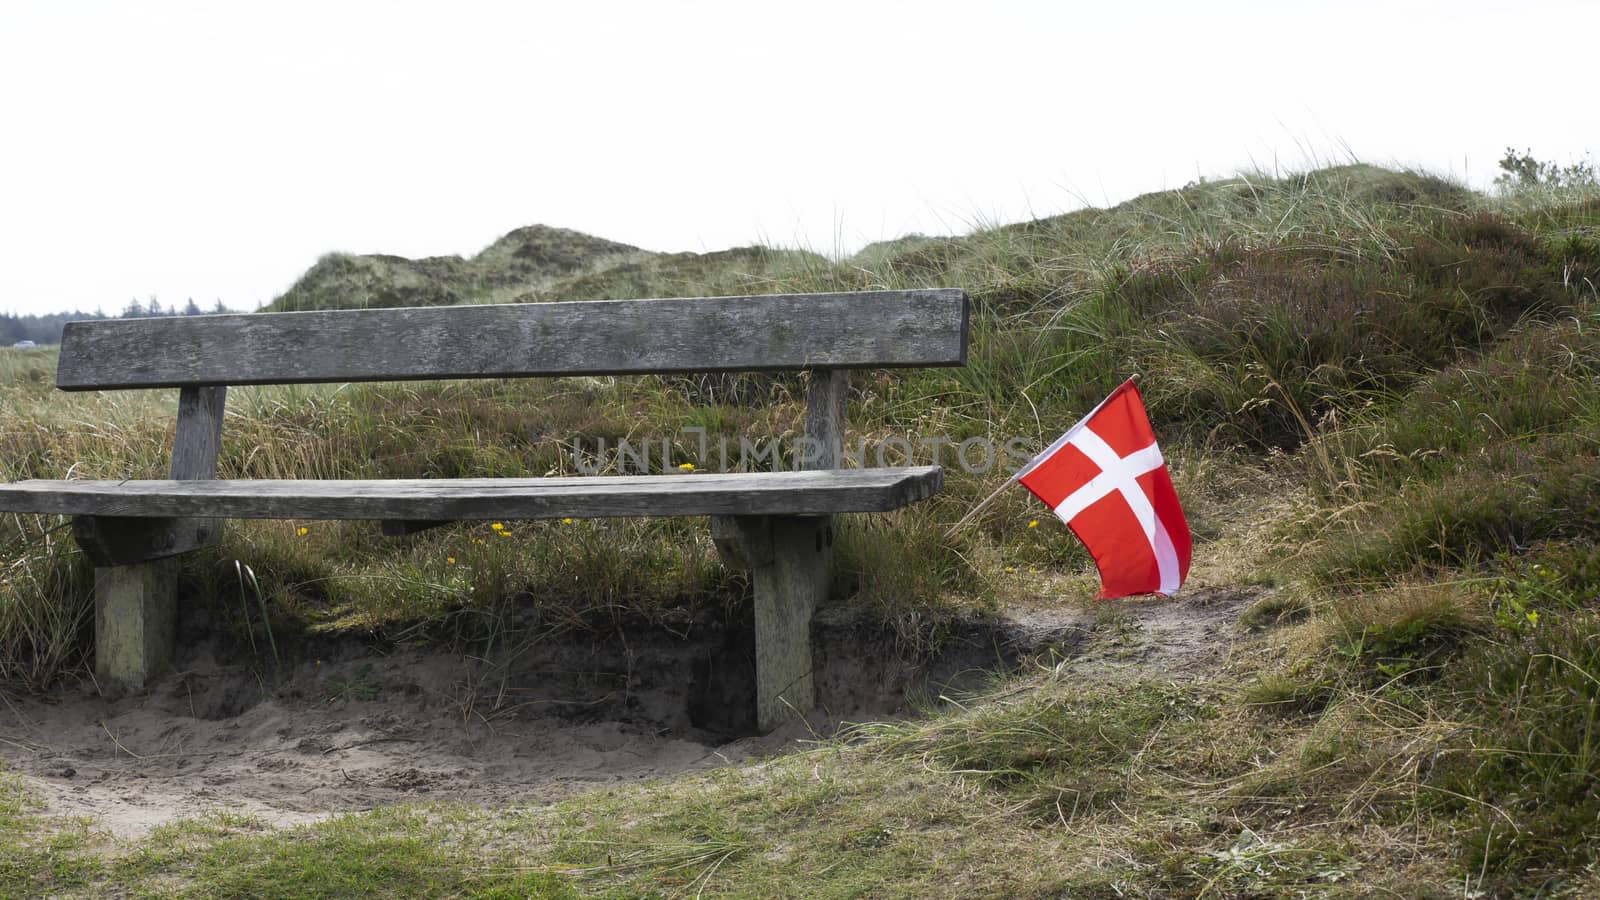 A bench to rest in the national park in Denmark by Fr@nk